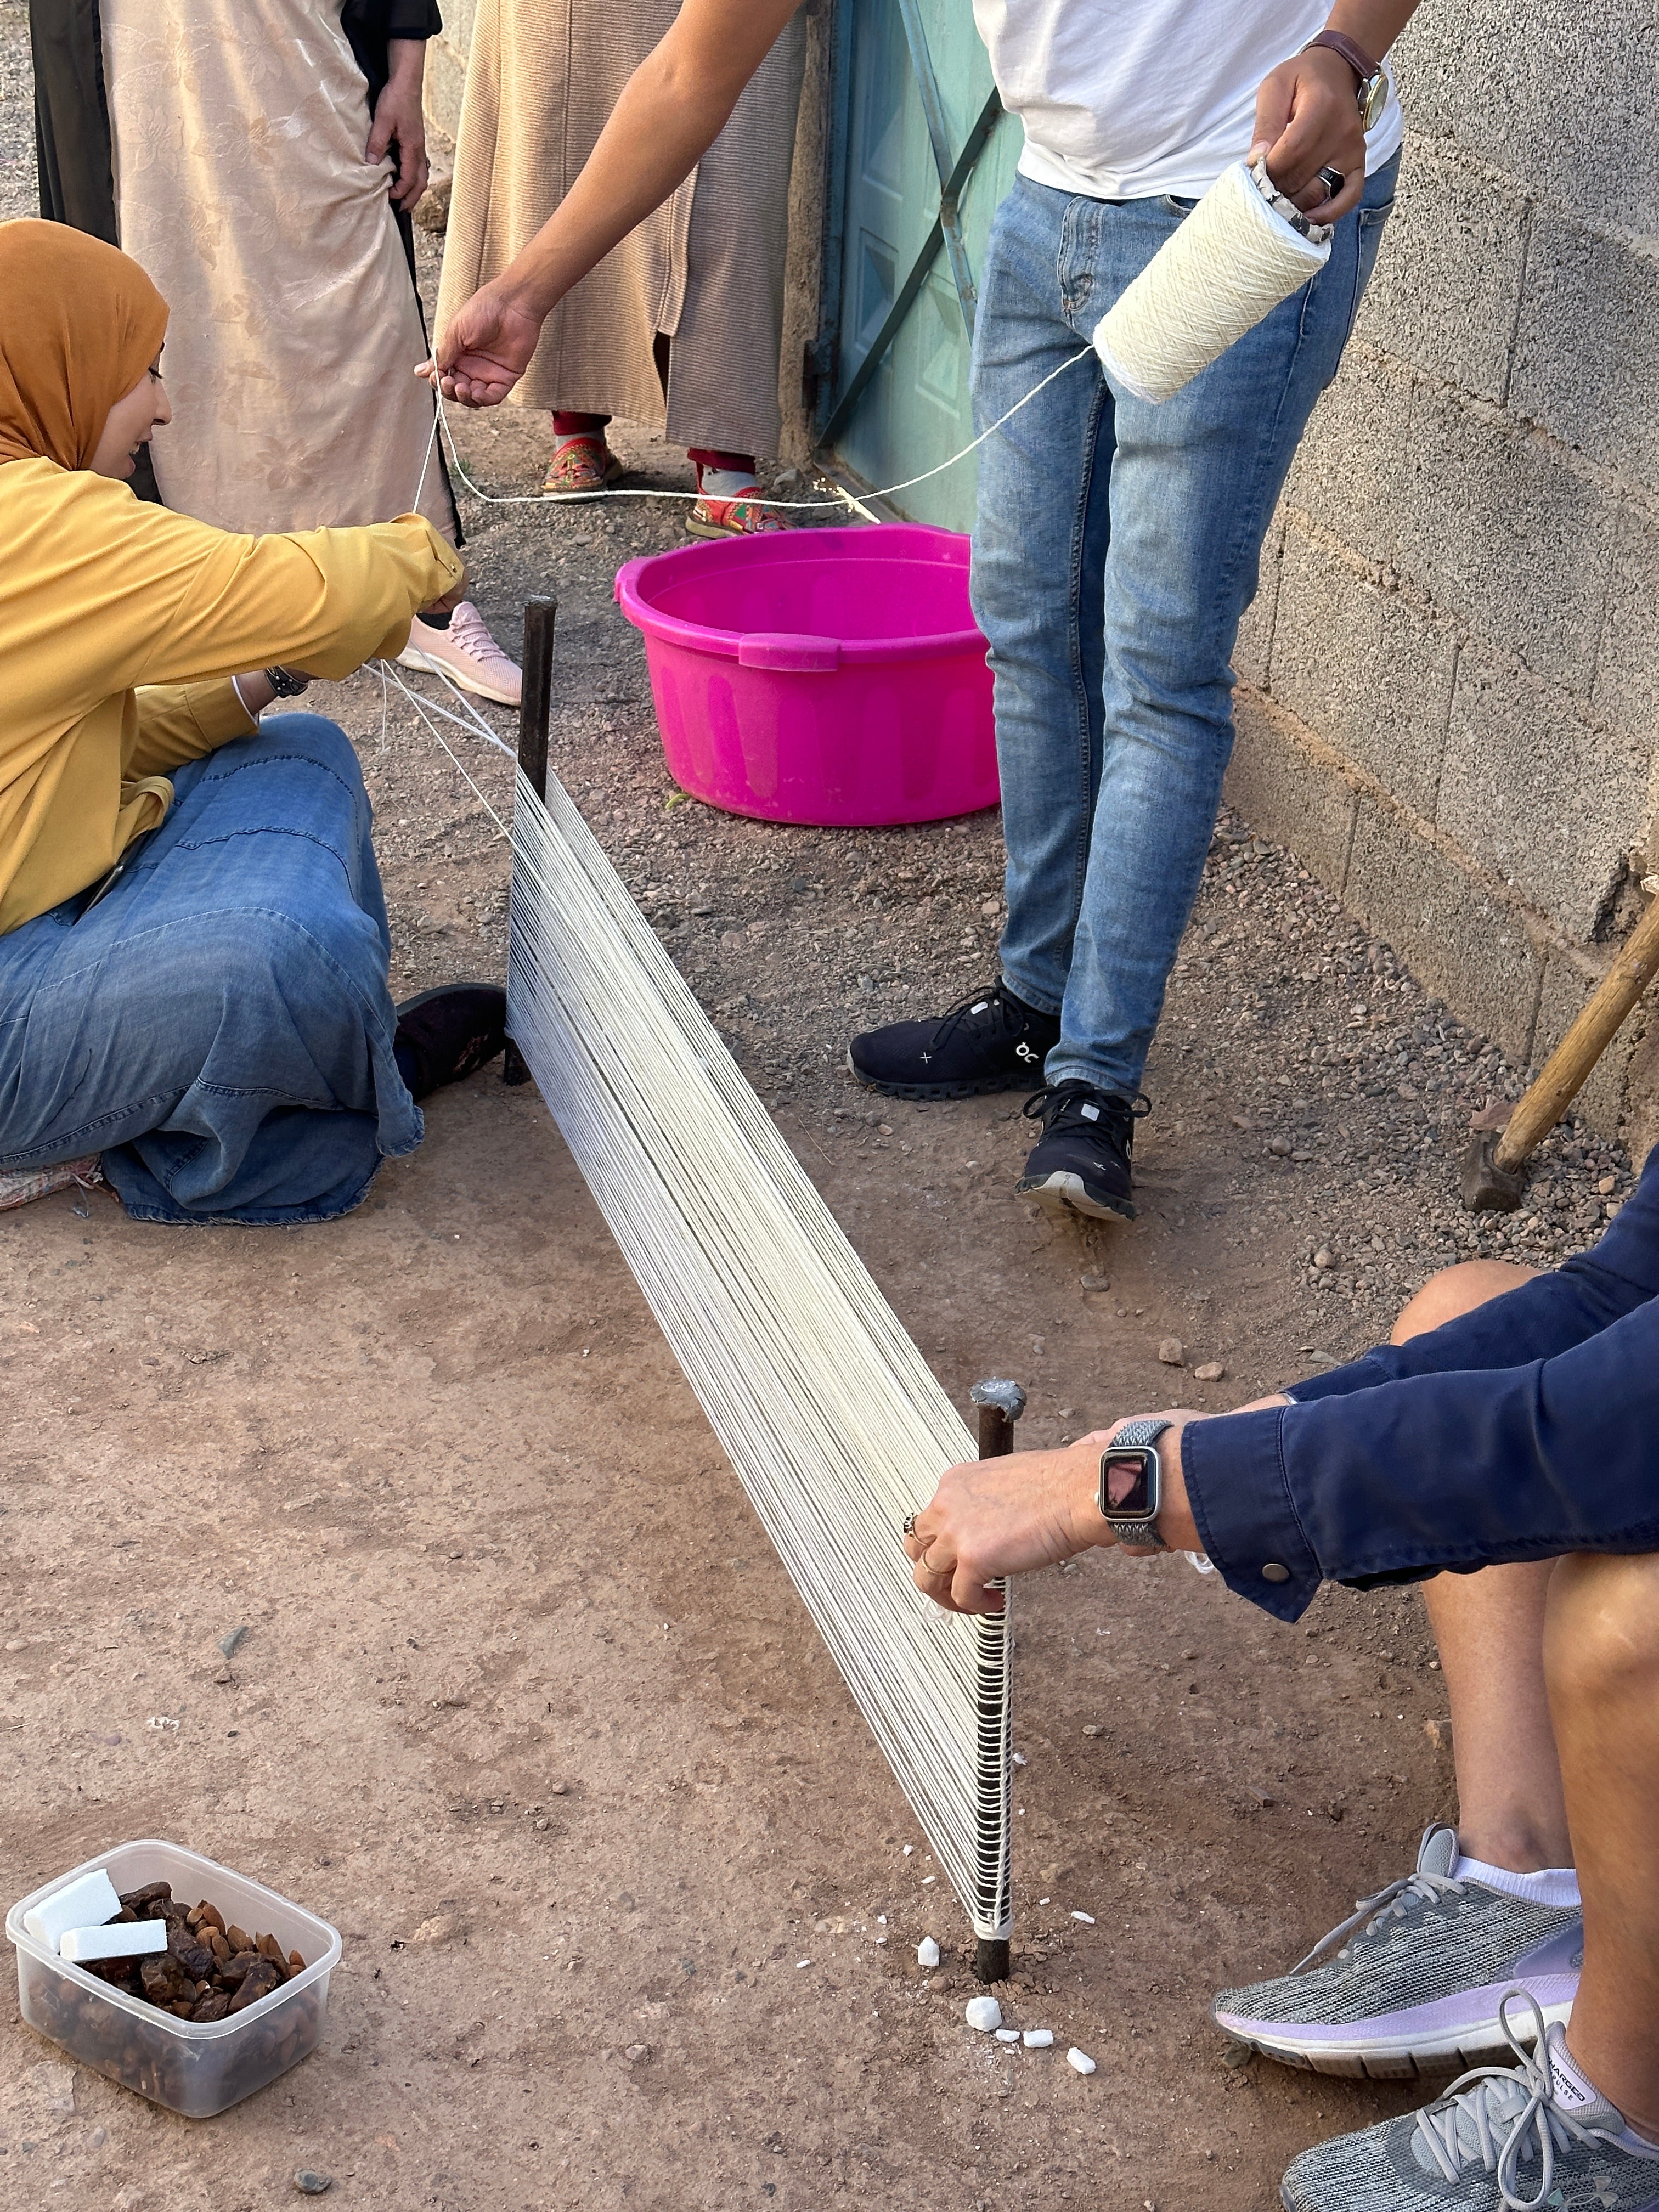 A group of Moroccan community members work together to wind a warp for weaving around metal stakes in the ground.